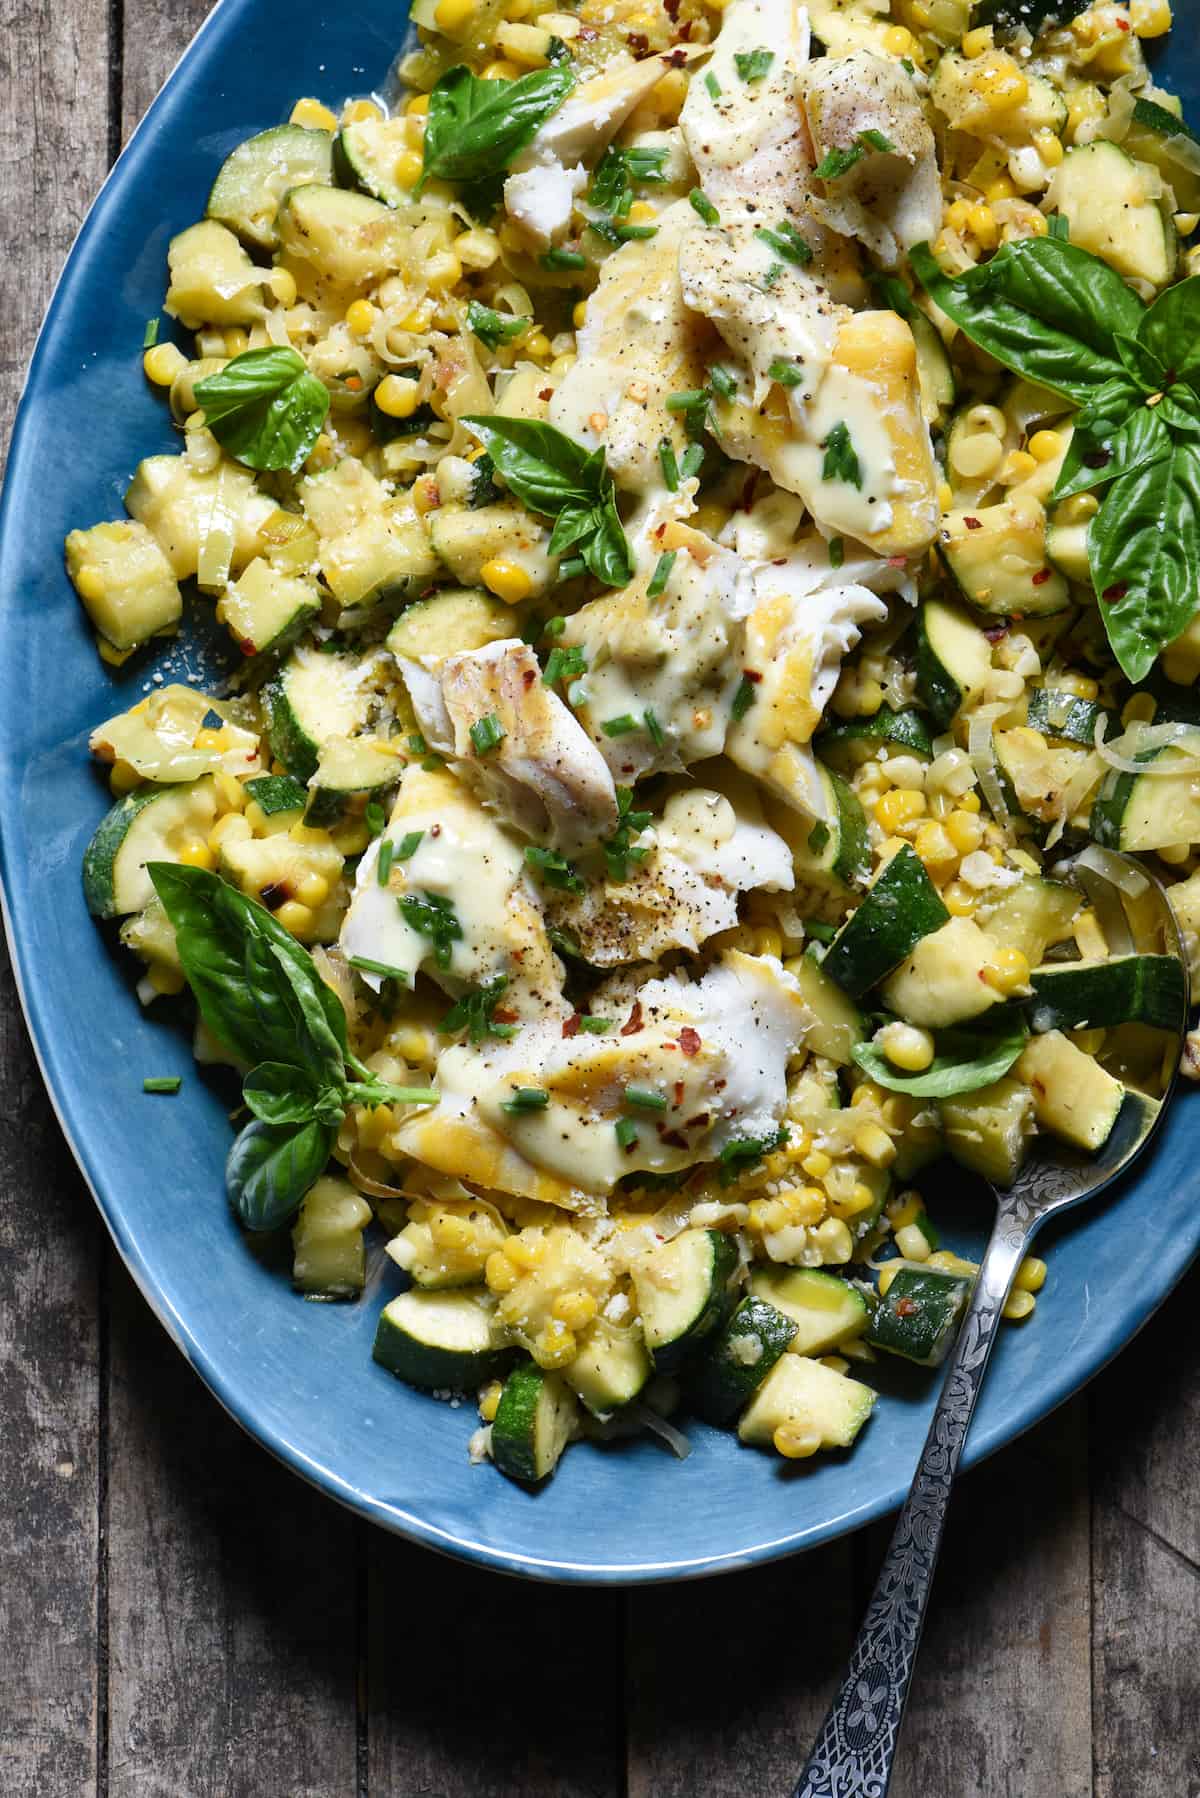 Summer is served on a platter in this Parmesan Corn & Zucchini Sauté with Haddock recipe. Learn how to make a fast, easy vegetable sauté that you'll come back to again and again all summer long. Top it with fish or your favorite protein to make it a complete meal! | foxeslovelemons.com